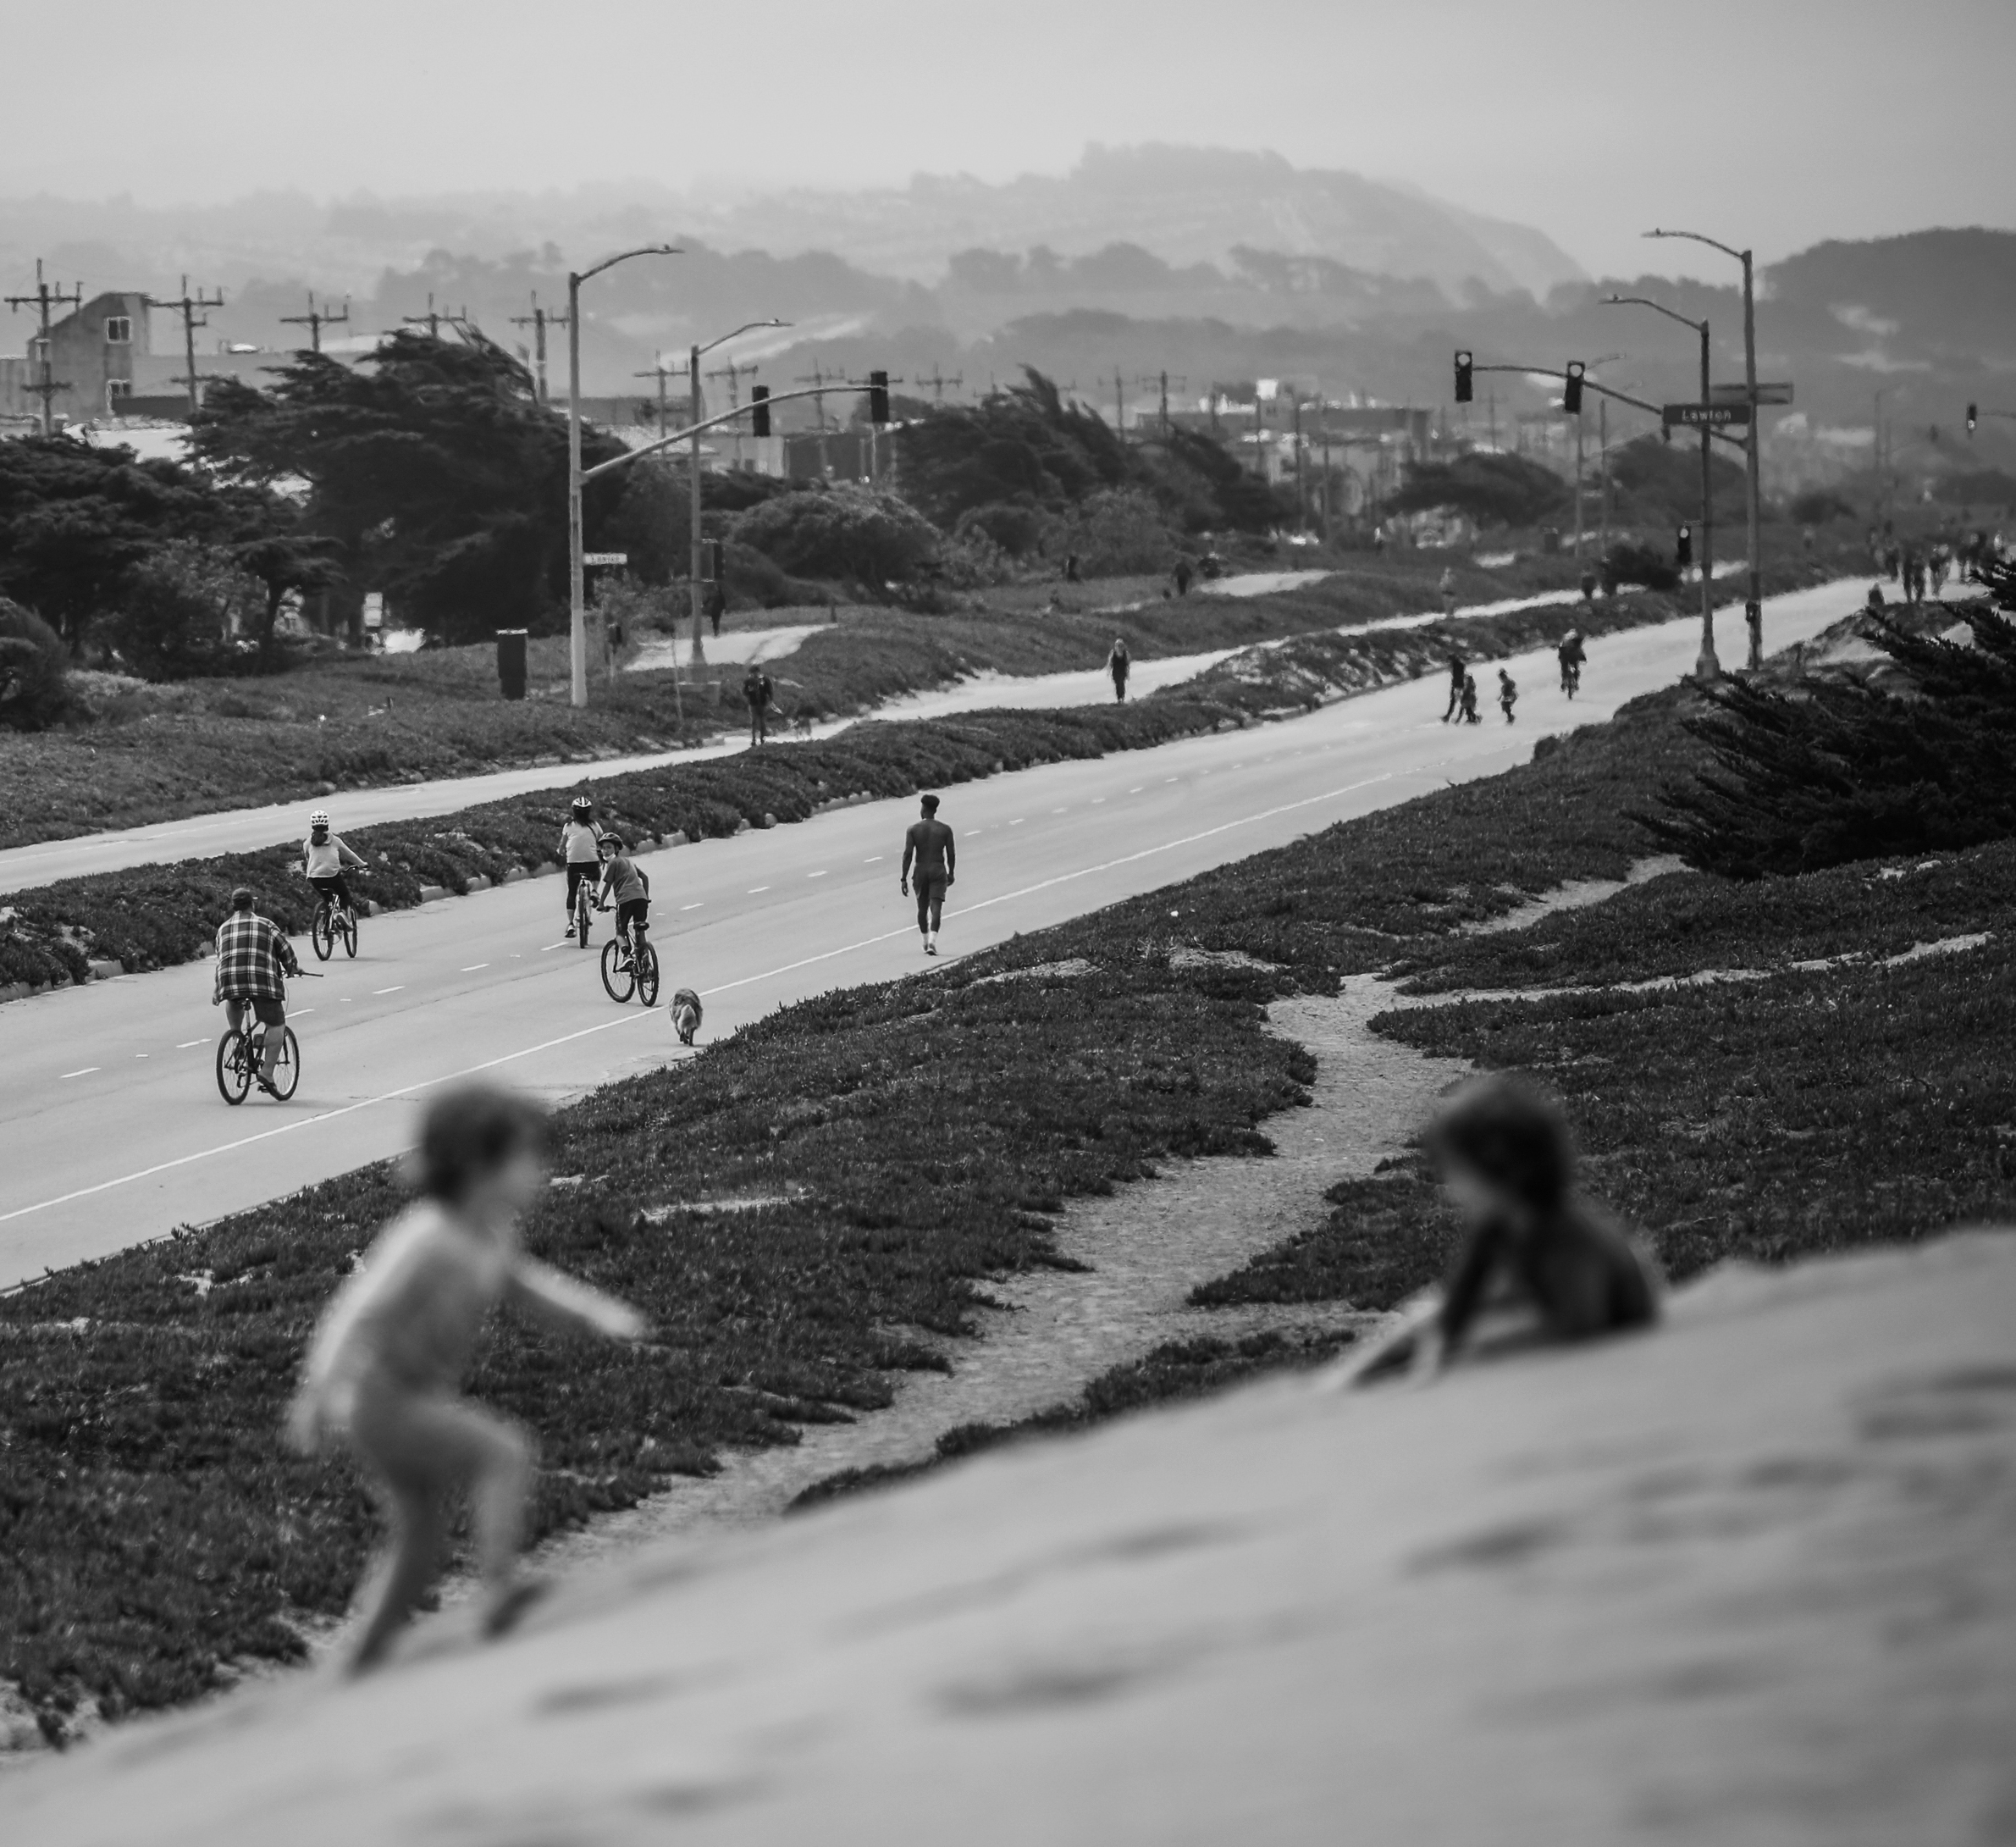 The black-and-white image depicts a street scene with cyclists and pedestrians along a hilly road. In the foreground, two children play on a grassy slope.